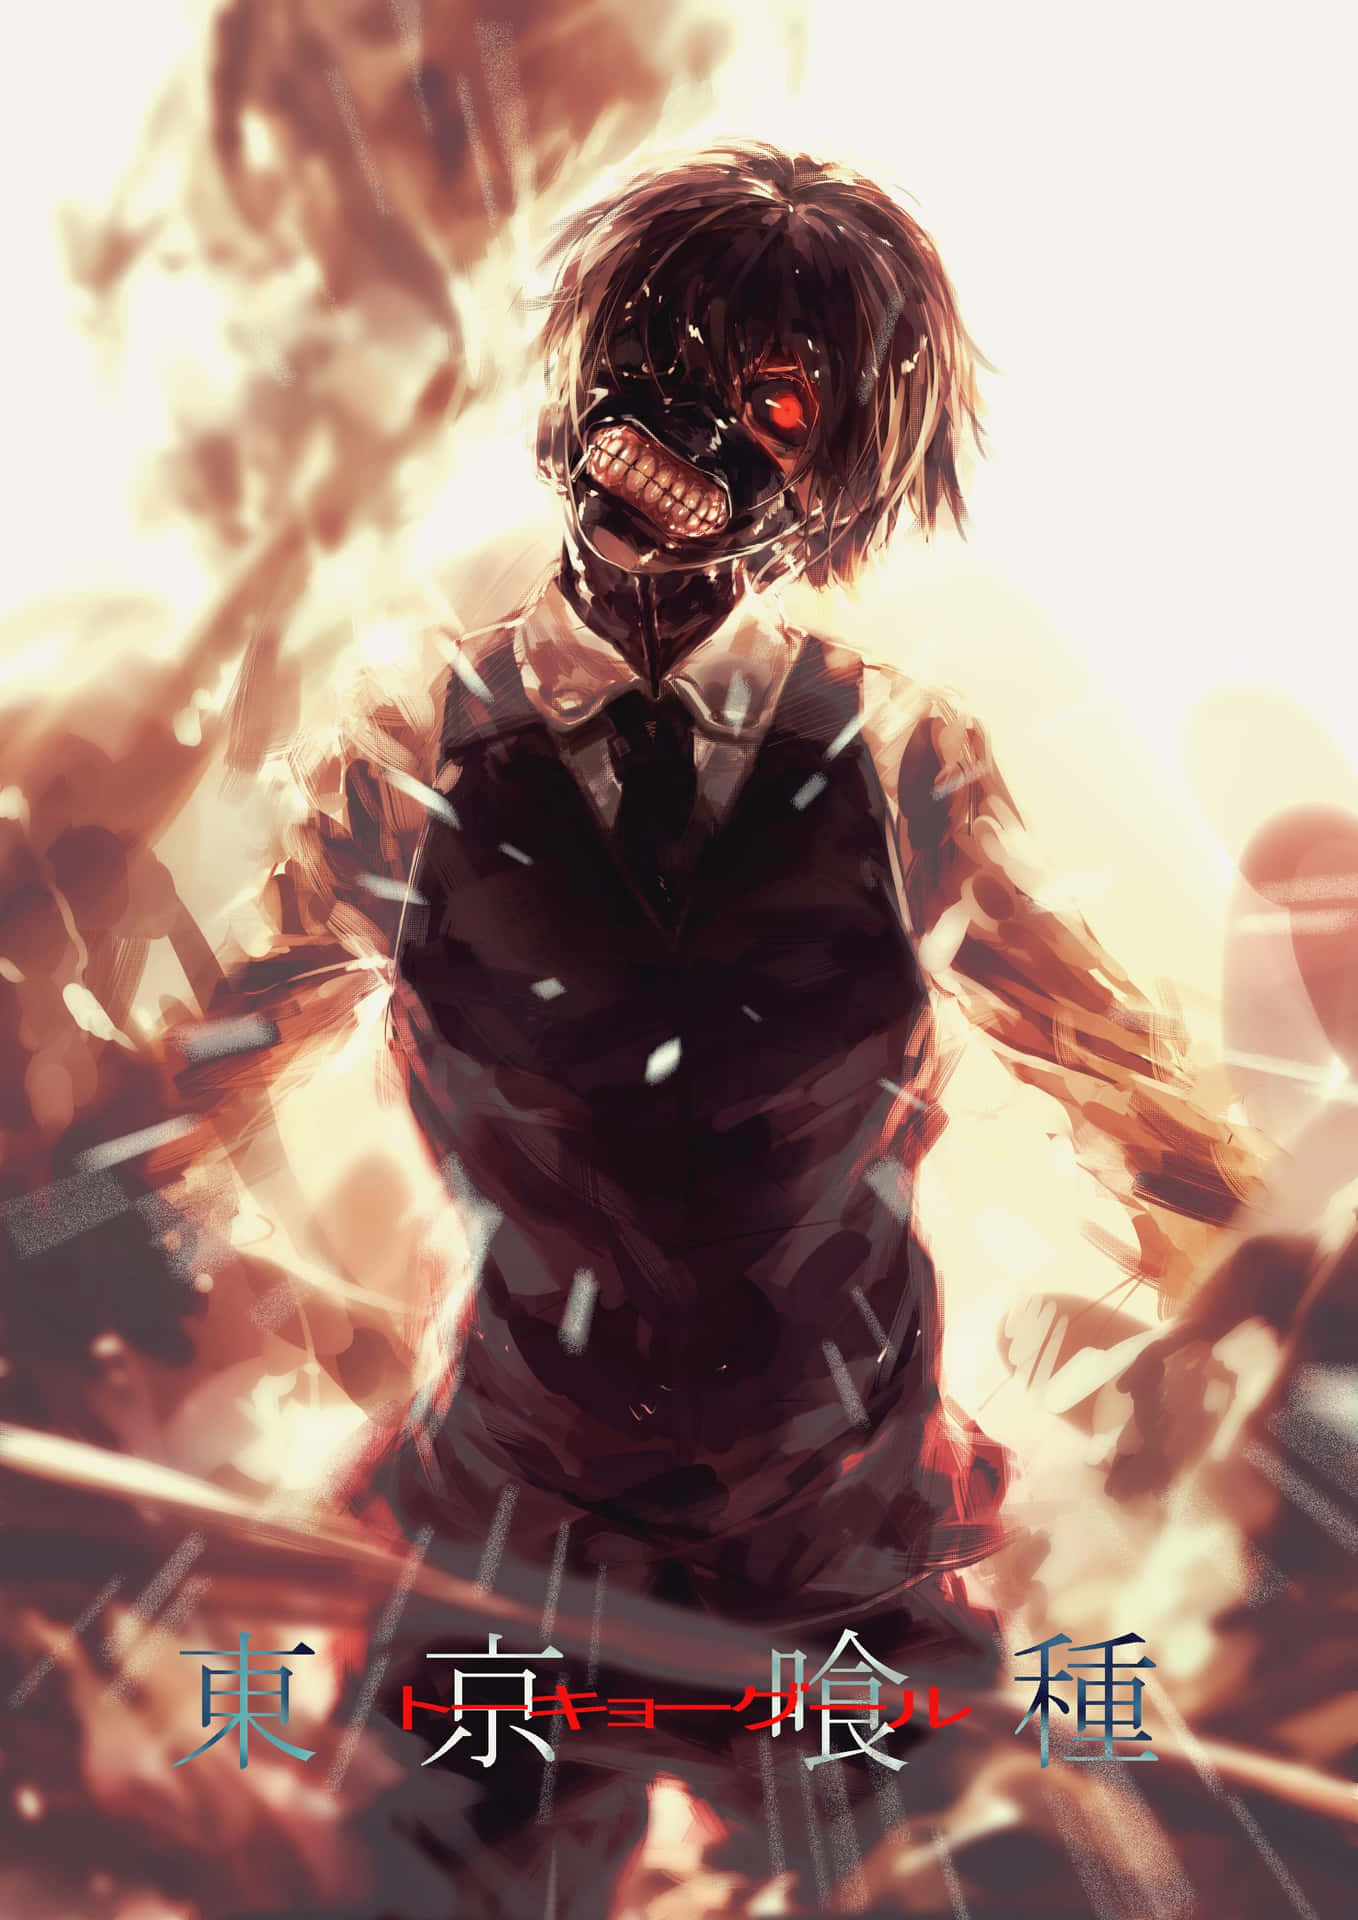 Unchain your greatest fear - Tokyo Ghoul